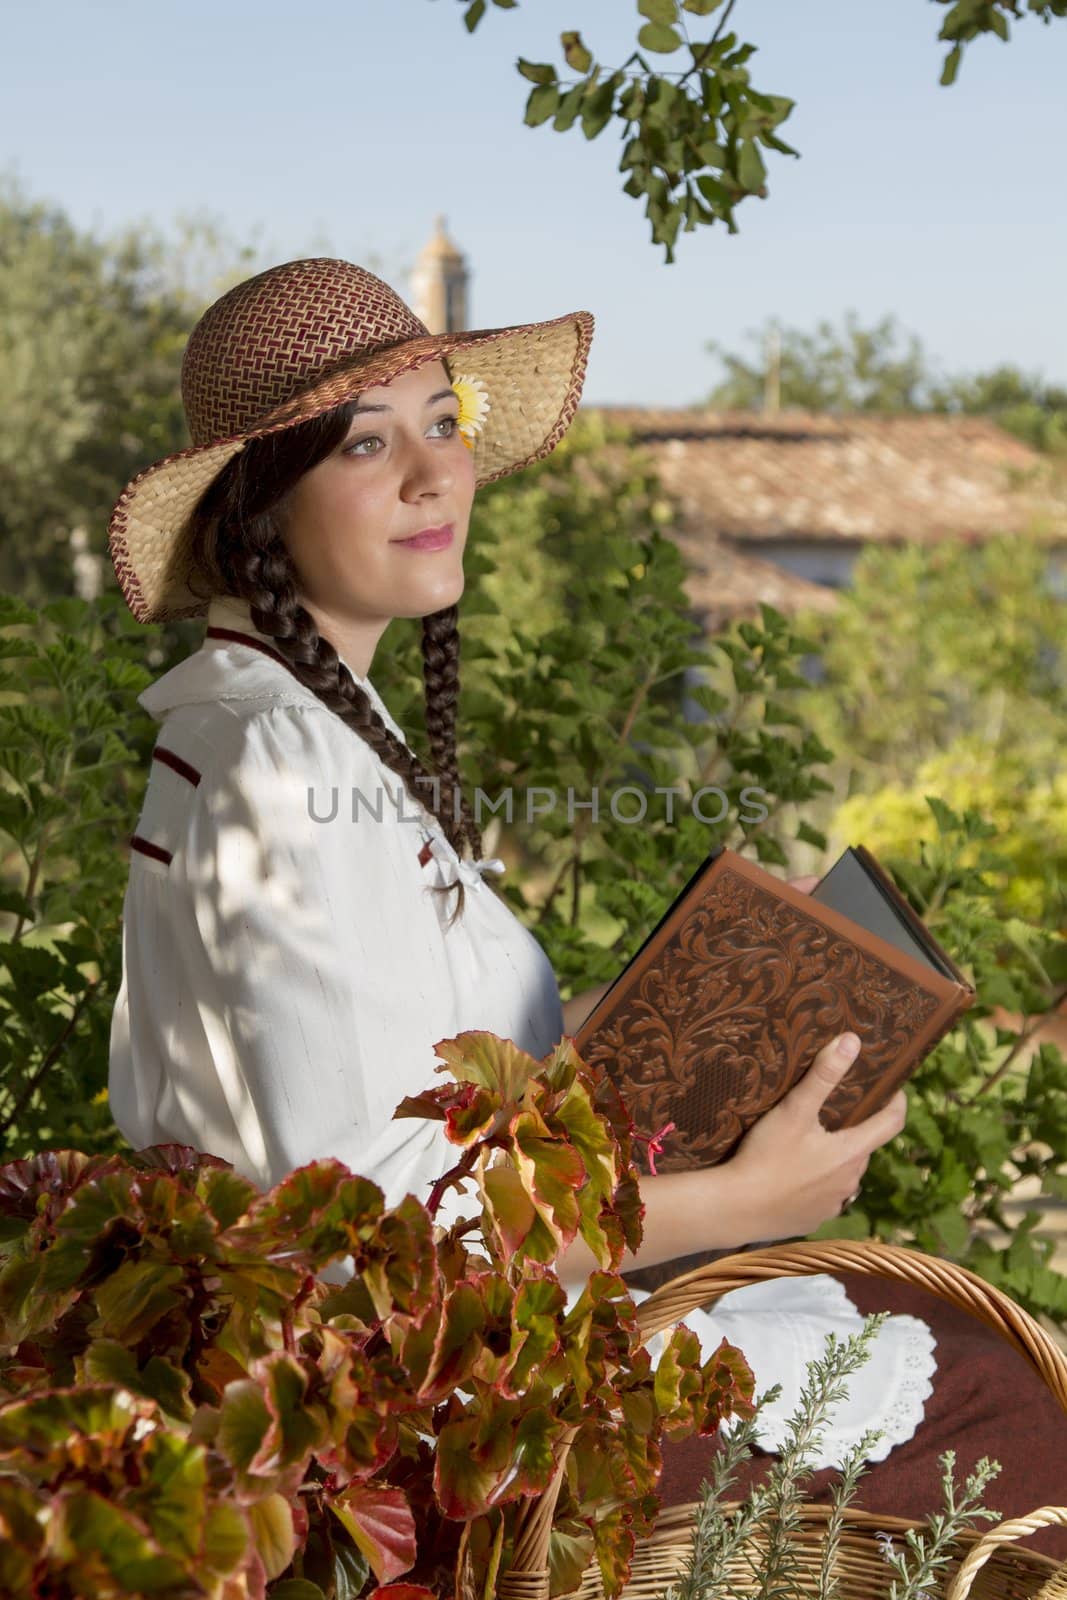 View of a beautiful girl in a classic dress reading a story book.